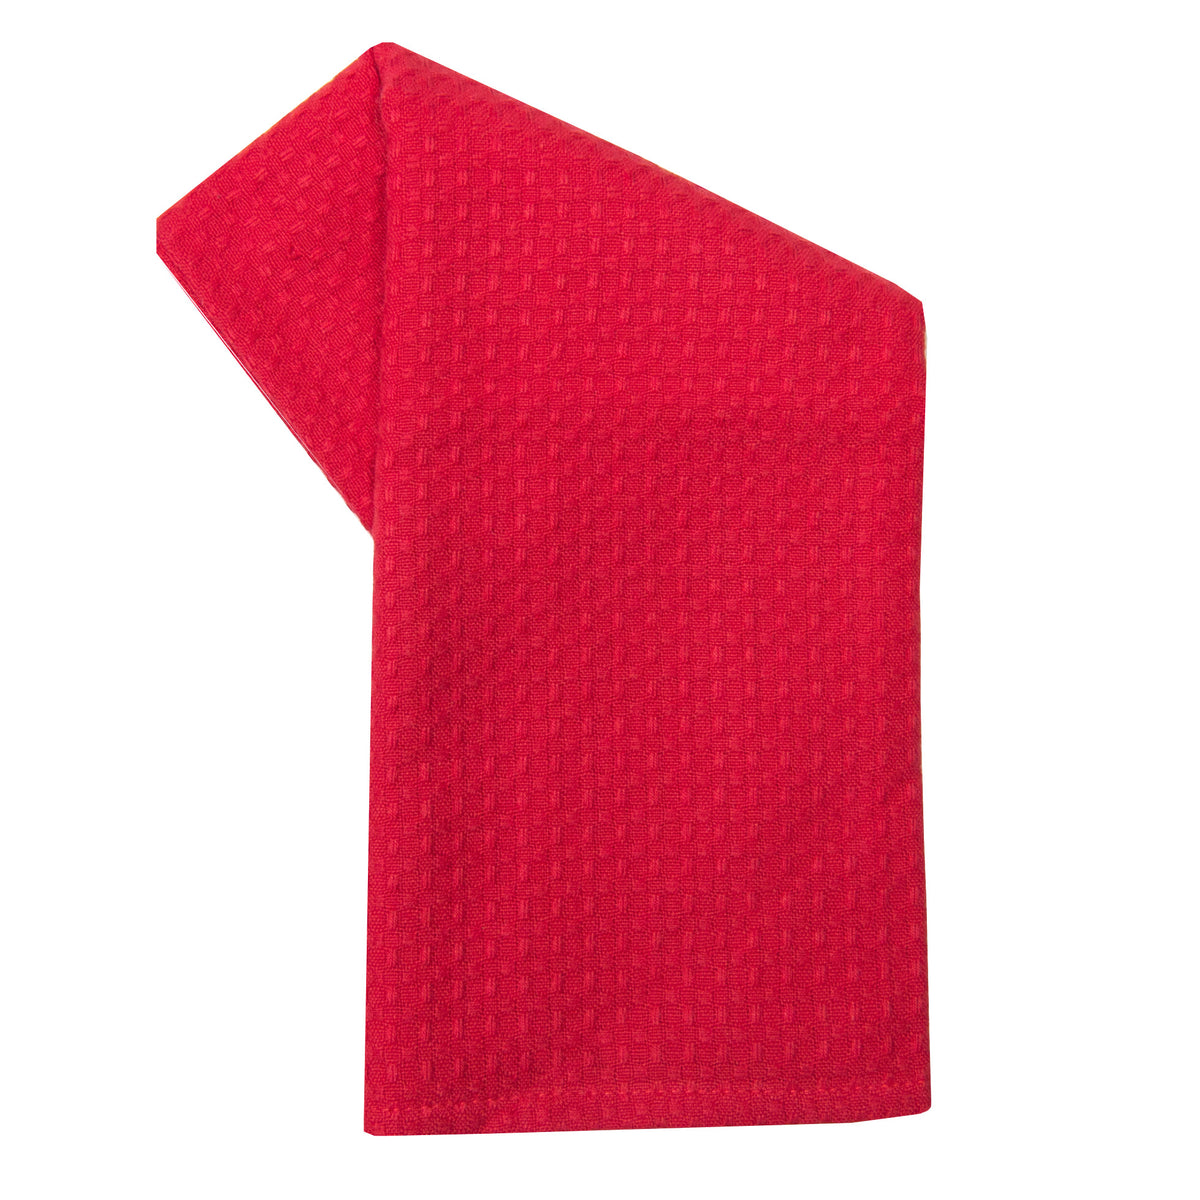 Dunroven House Solid Red Oven Mitt (Regular)